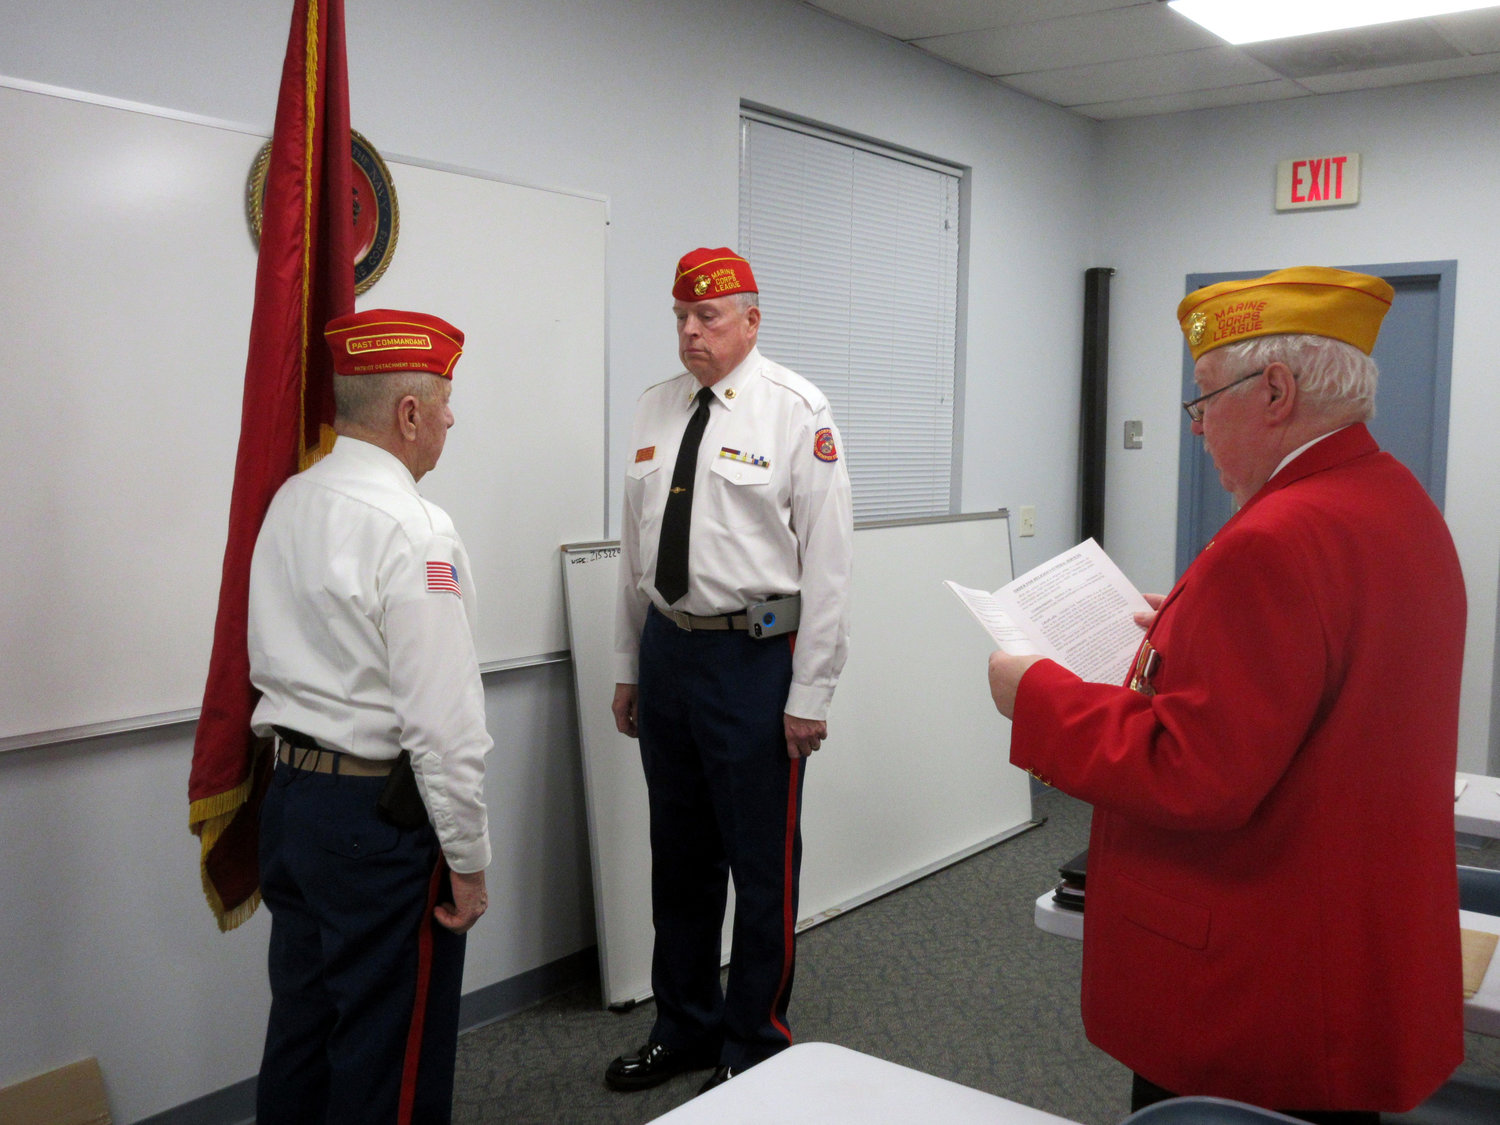 Outgoing Commandant Neil Clark Sr., left, and new Commandant Mike Clark, right, who is being sworn in by District 2 Vice Commandant Gene Irvin.